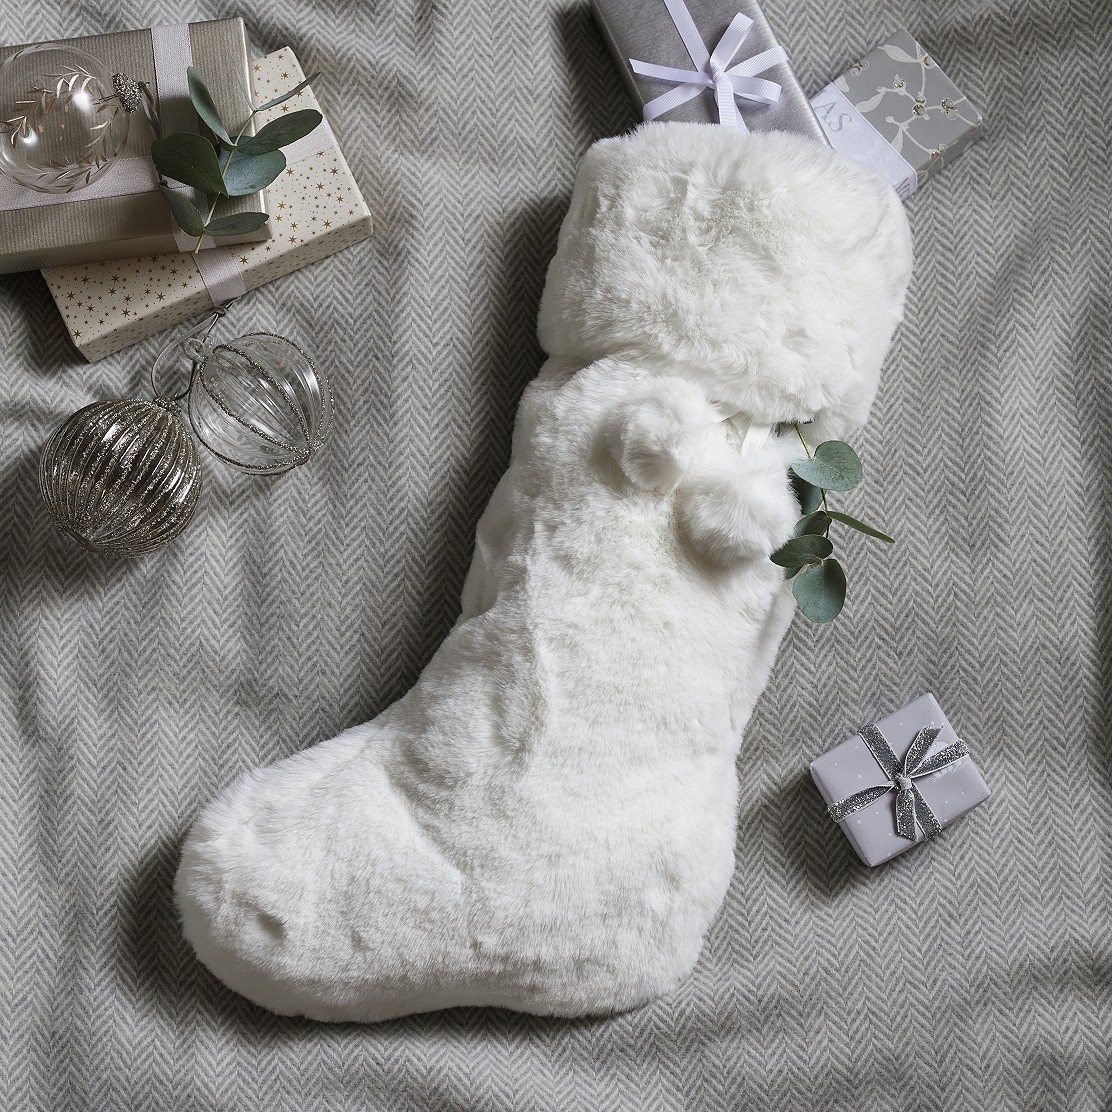 Details about   1PCS Plush Christmas Stockings White Faux Fur Large 22in Deluxe Hanging Xmas 